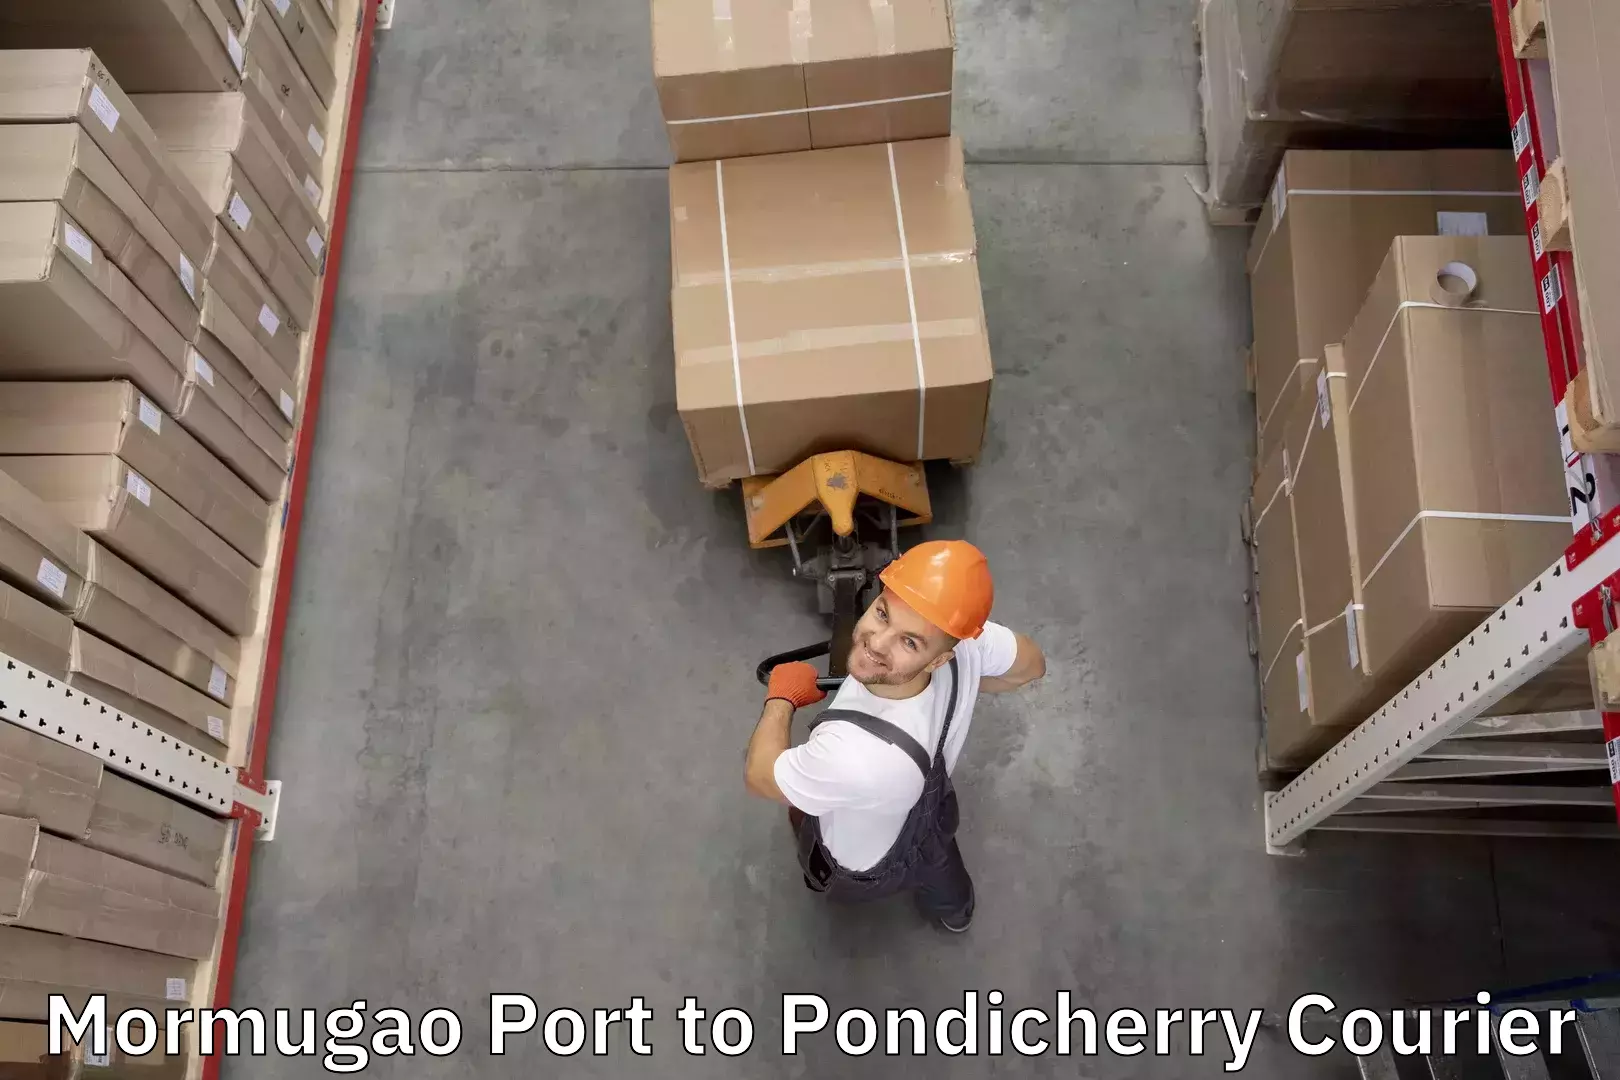 Instant baggage transport quote in Mormugao Port to Pondicherry University